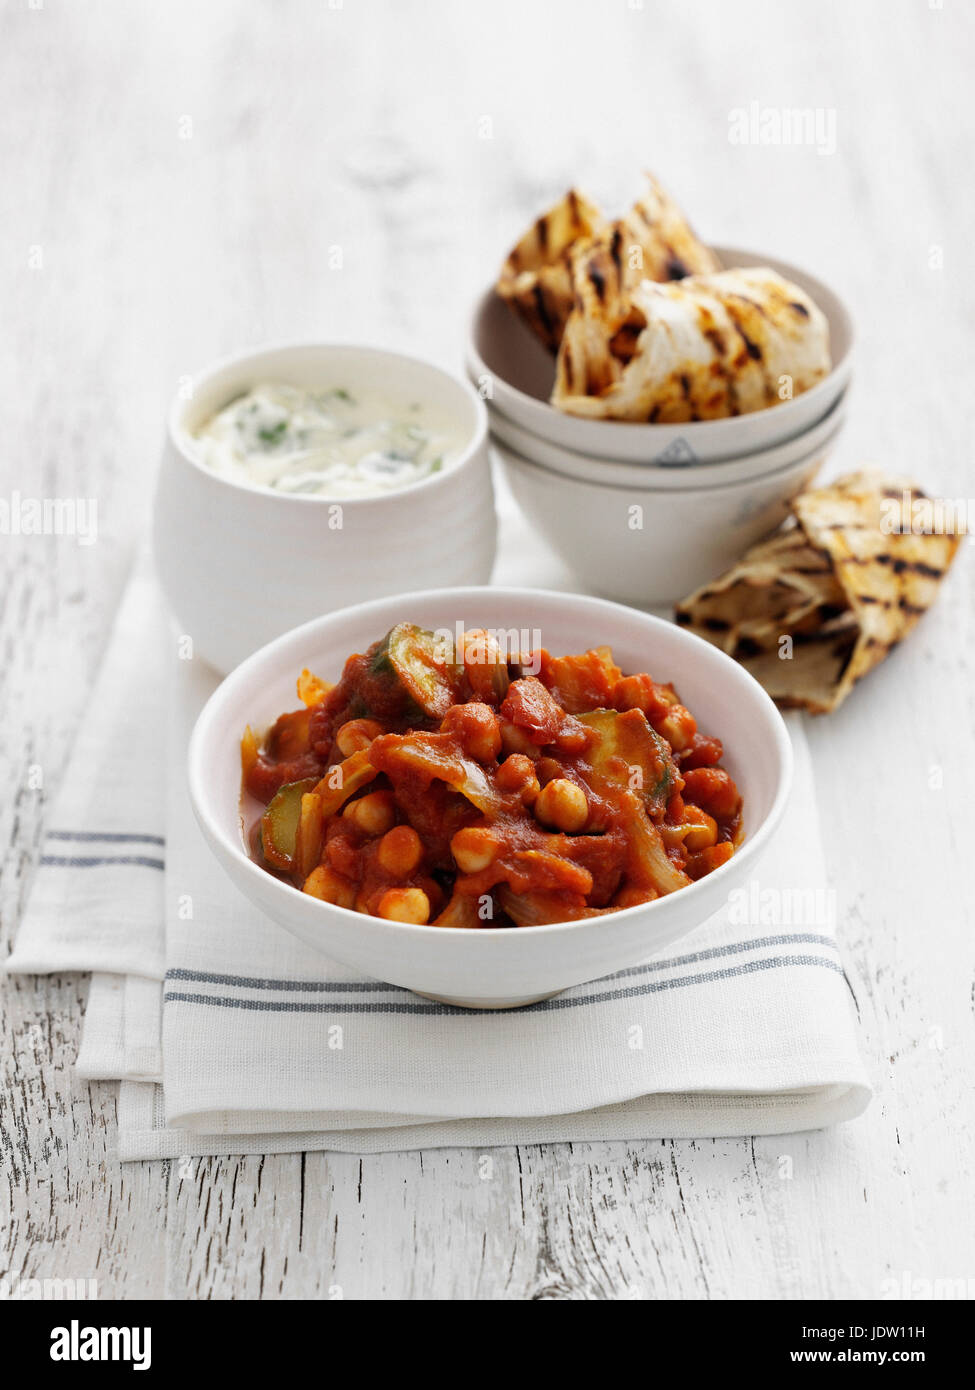 Plate of chickpea stew and bread Stock Photo